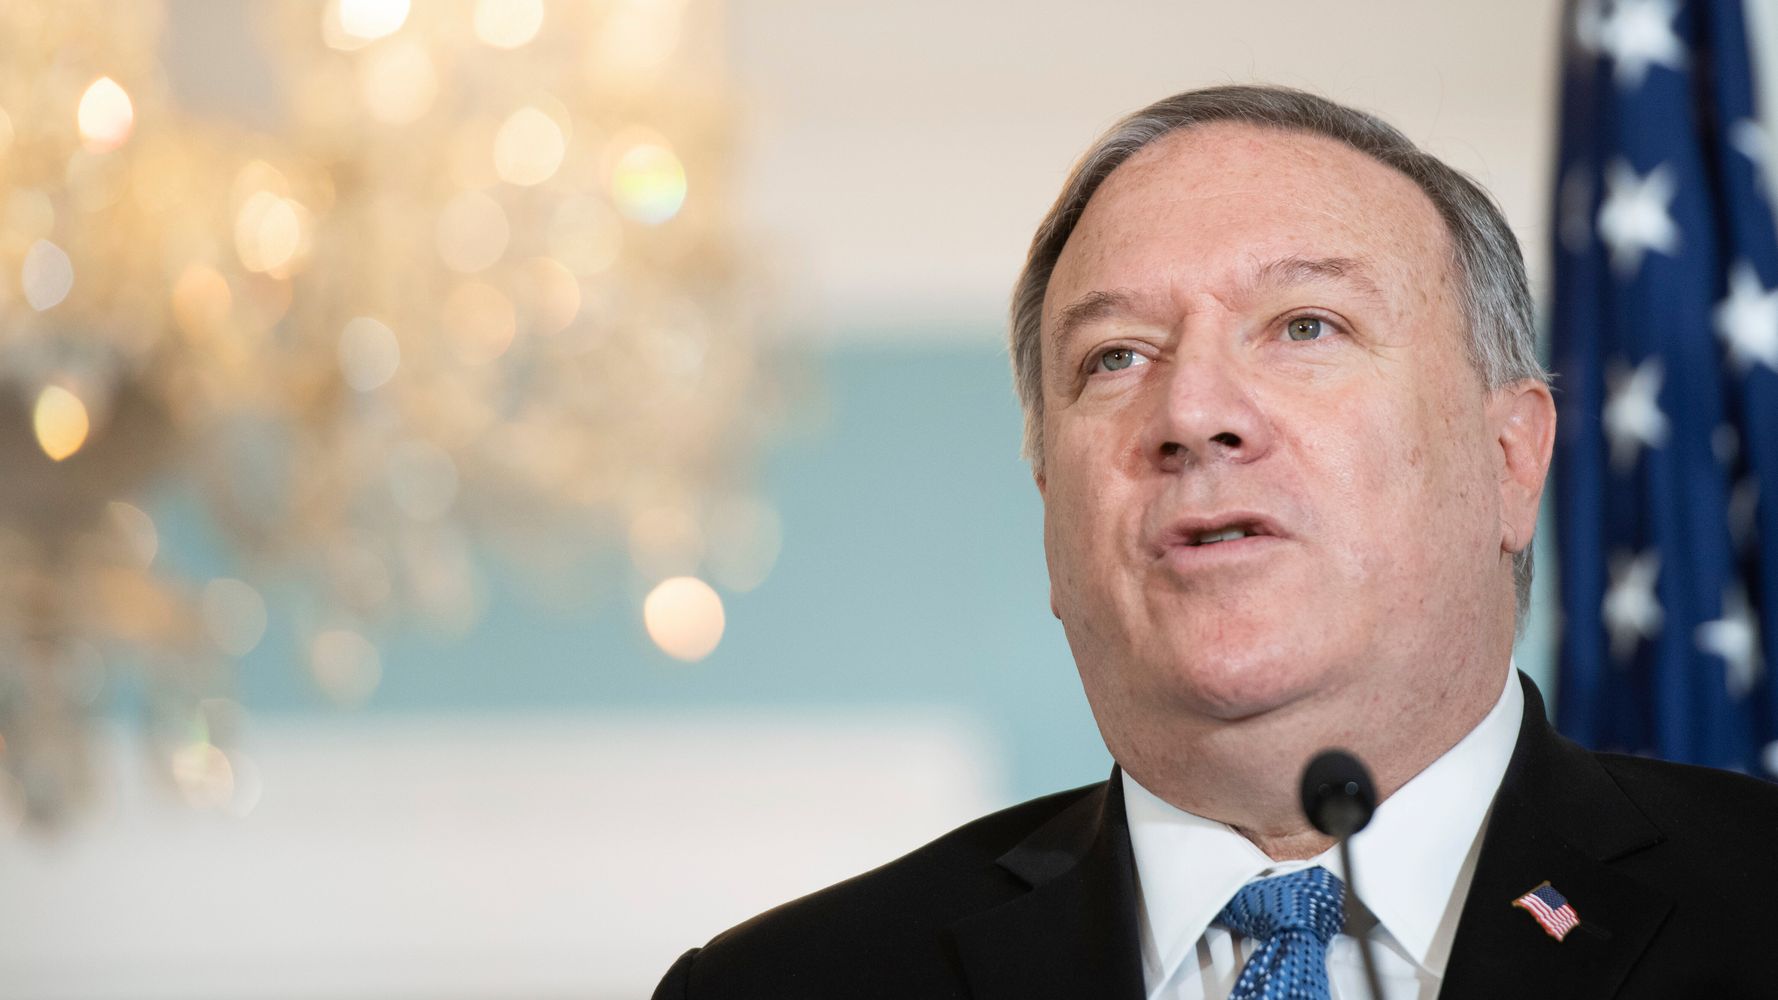 Mike Pompeo Sends Out 900 Invitations For One Big Holiday Party: Report